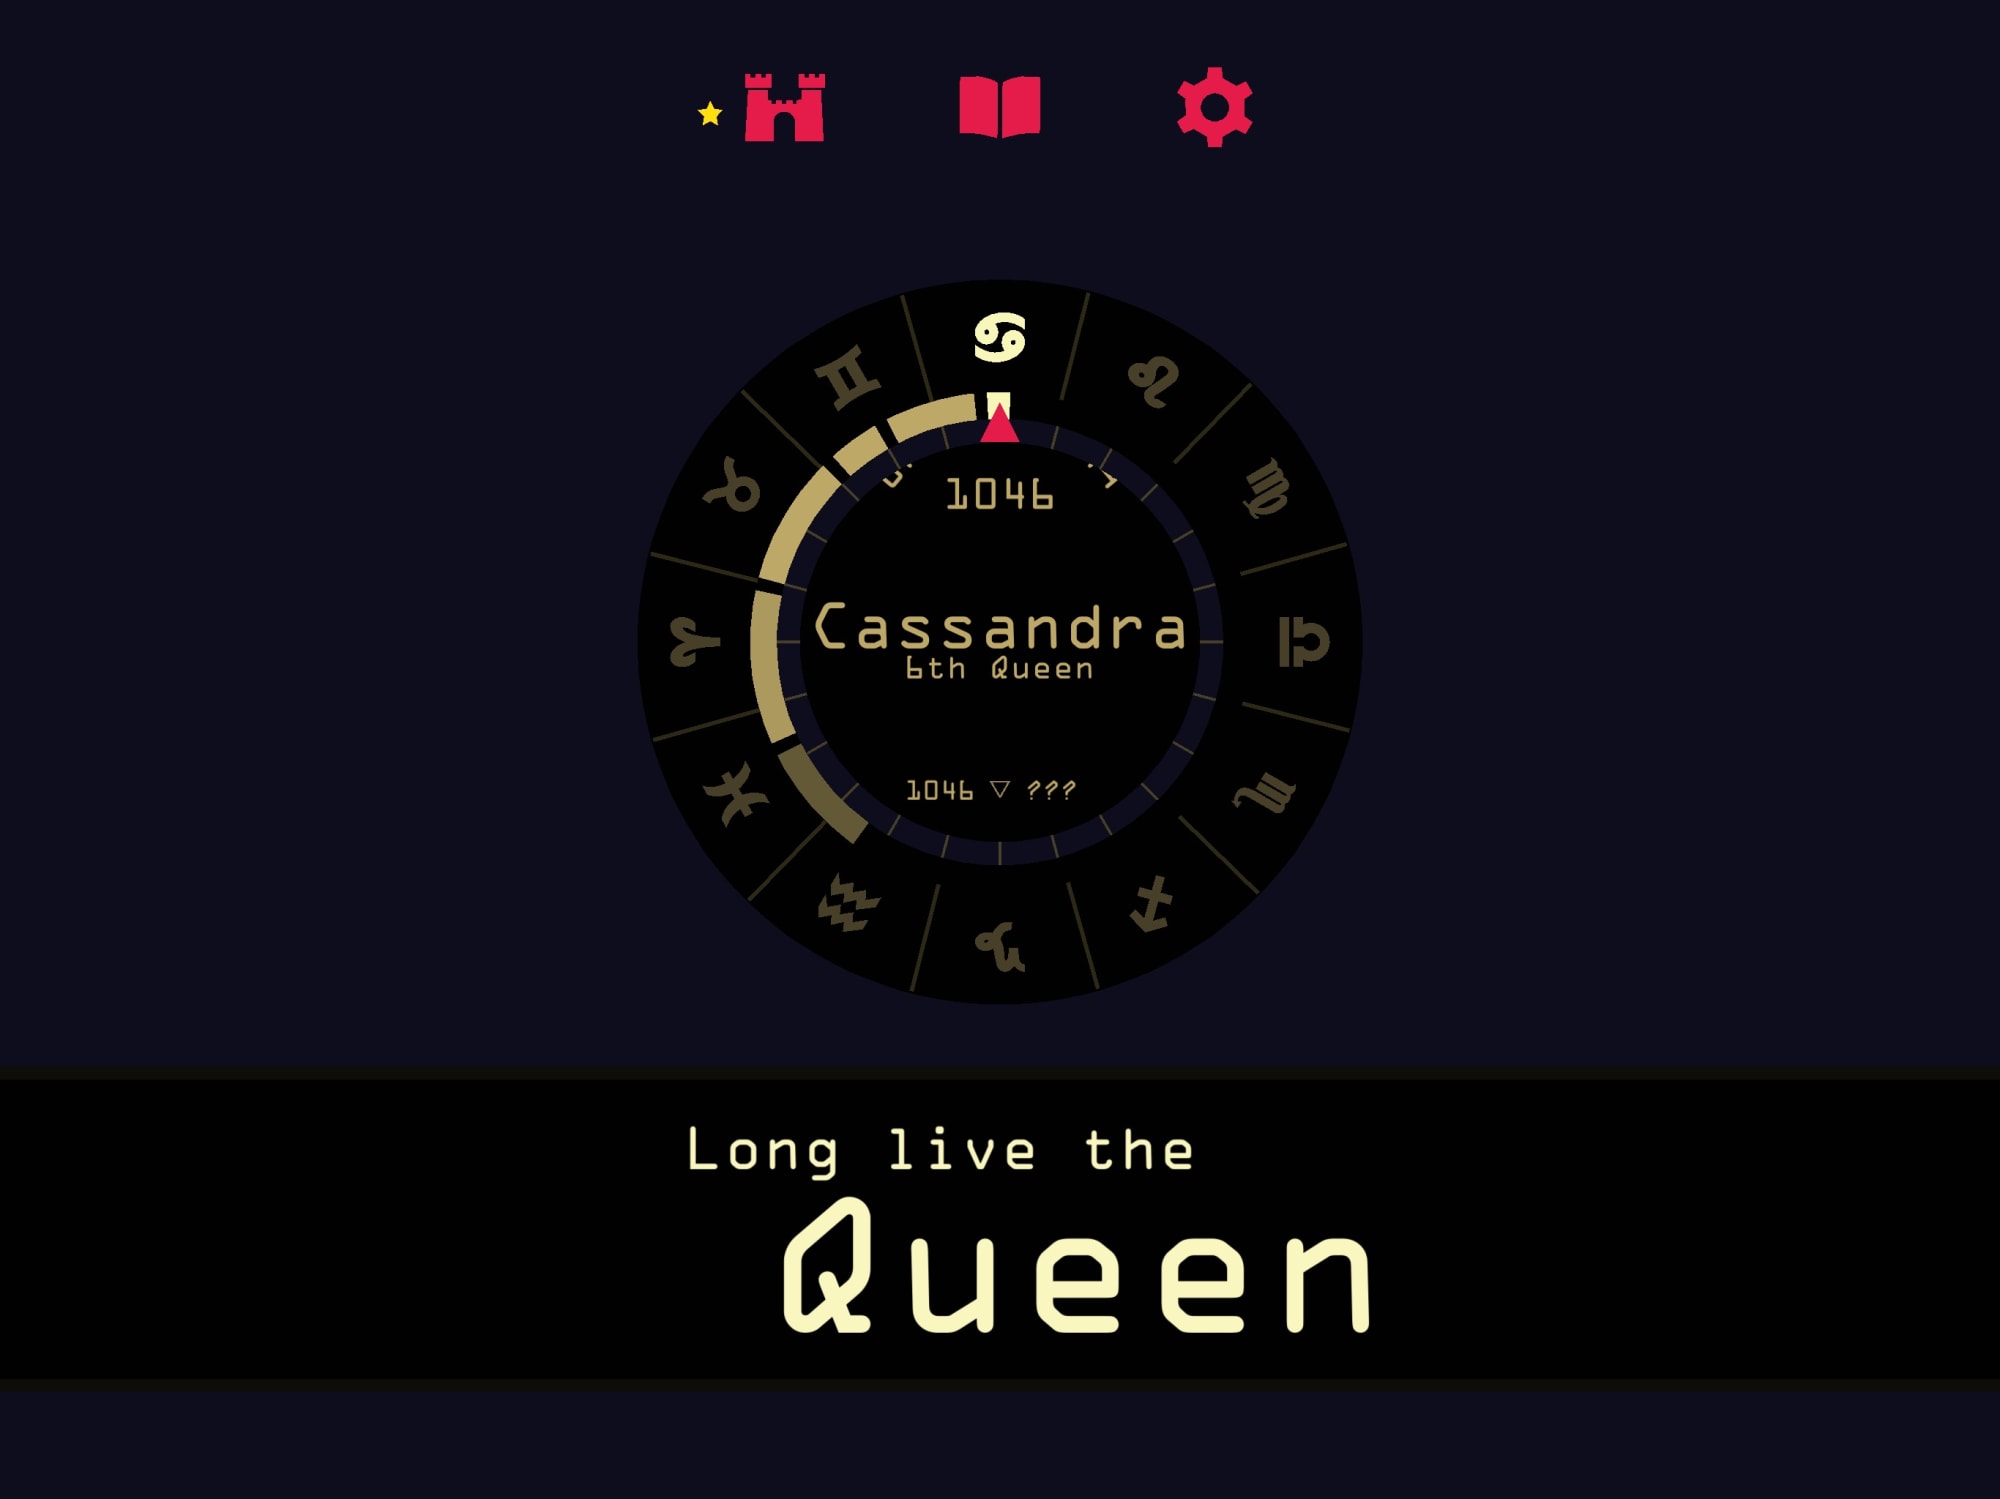 reigns her majesty guide download free